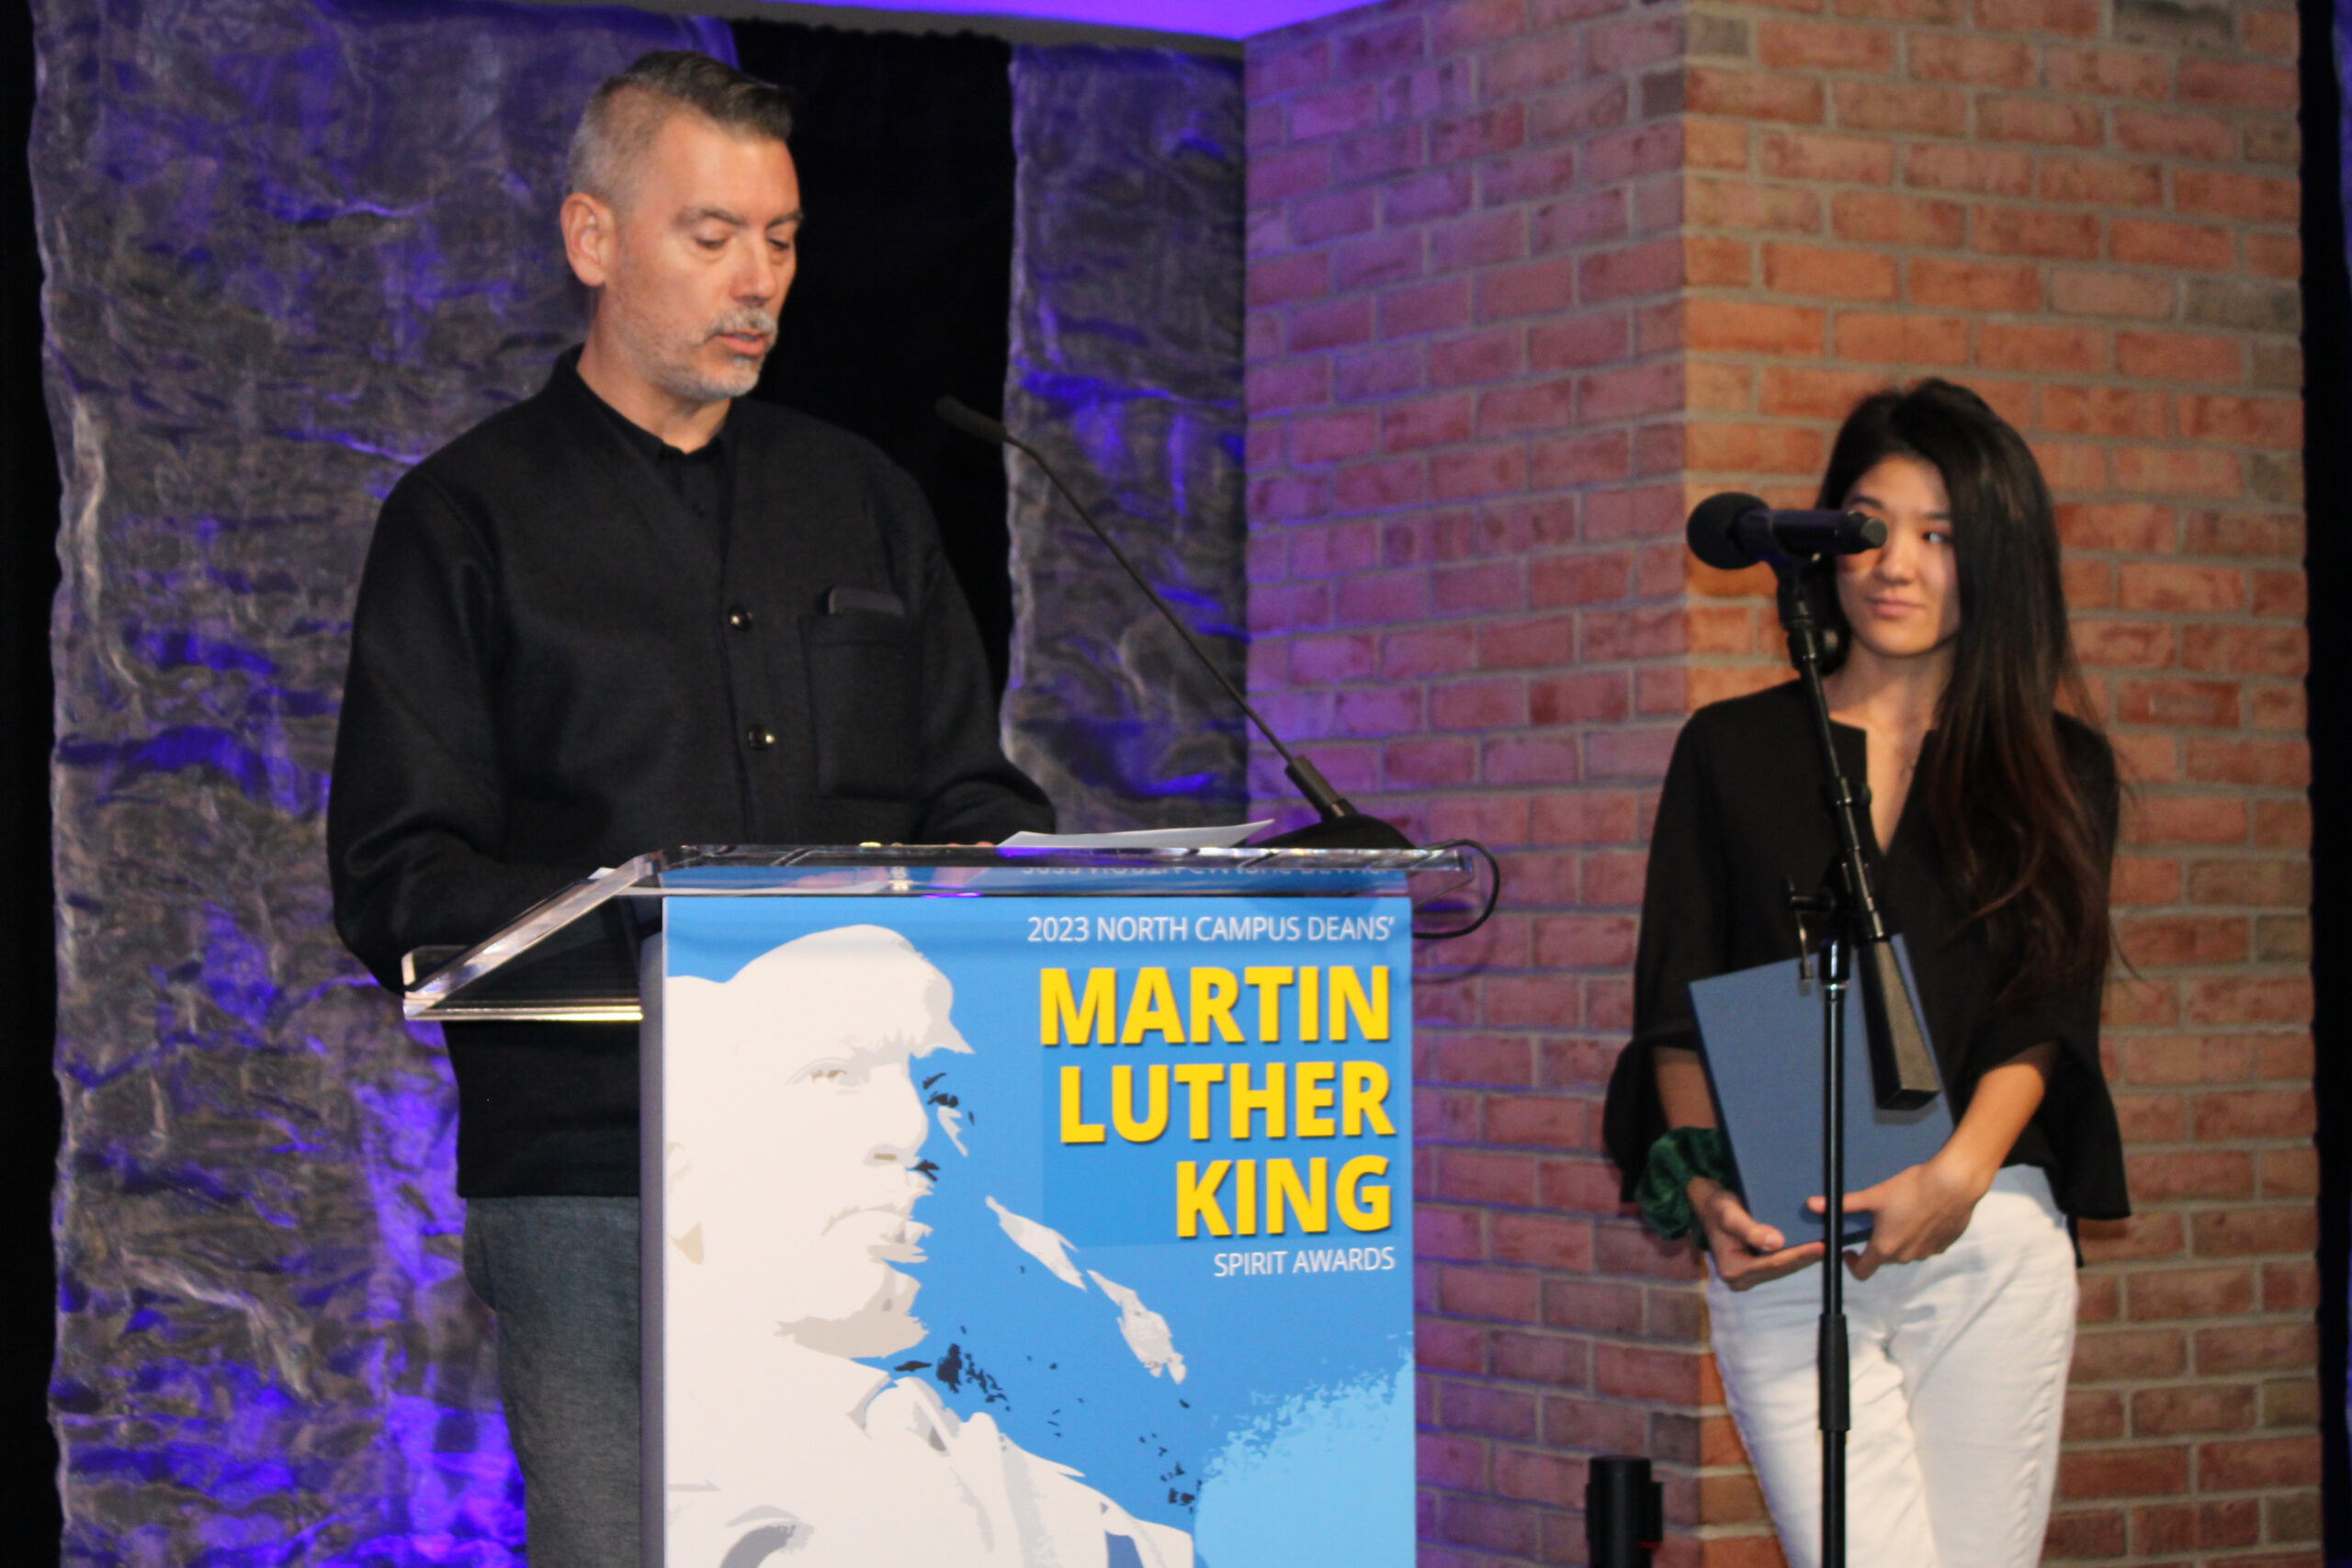 2023 NC Deans' MLK Spirit Awards — Student Recipient Anna Lam & Jonathan Massey, Dean, A. Alfred Taubman College of Architecture and Urban Planning & Professor of Architecture, Taubman College of Architecture and Urban Planning